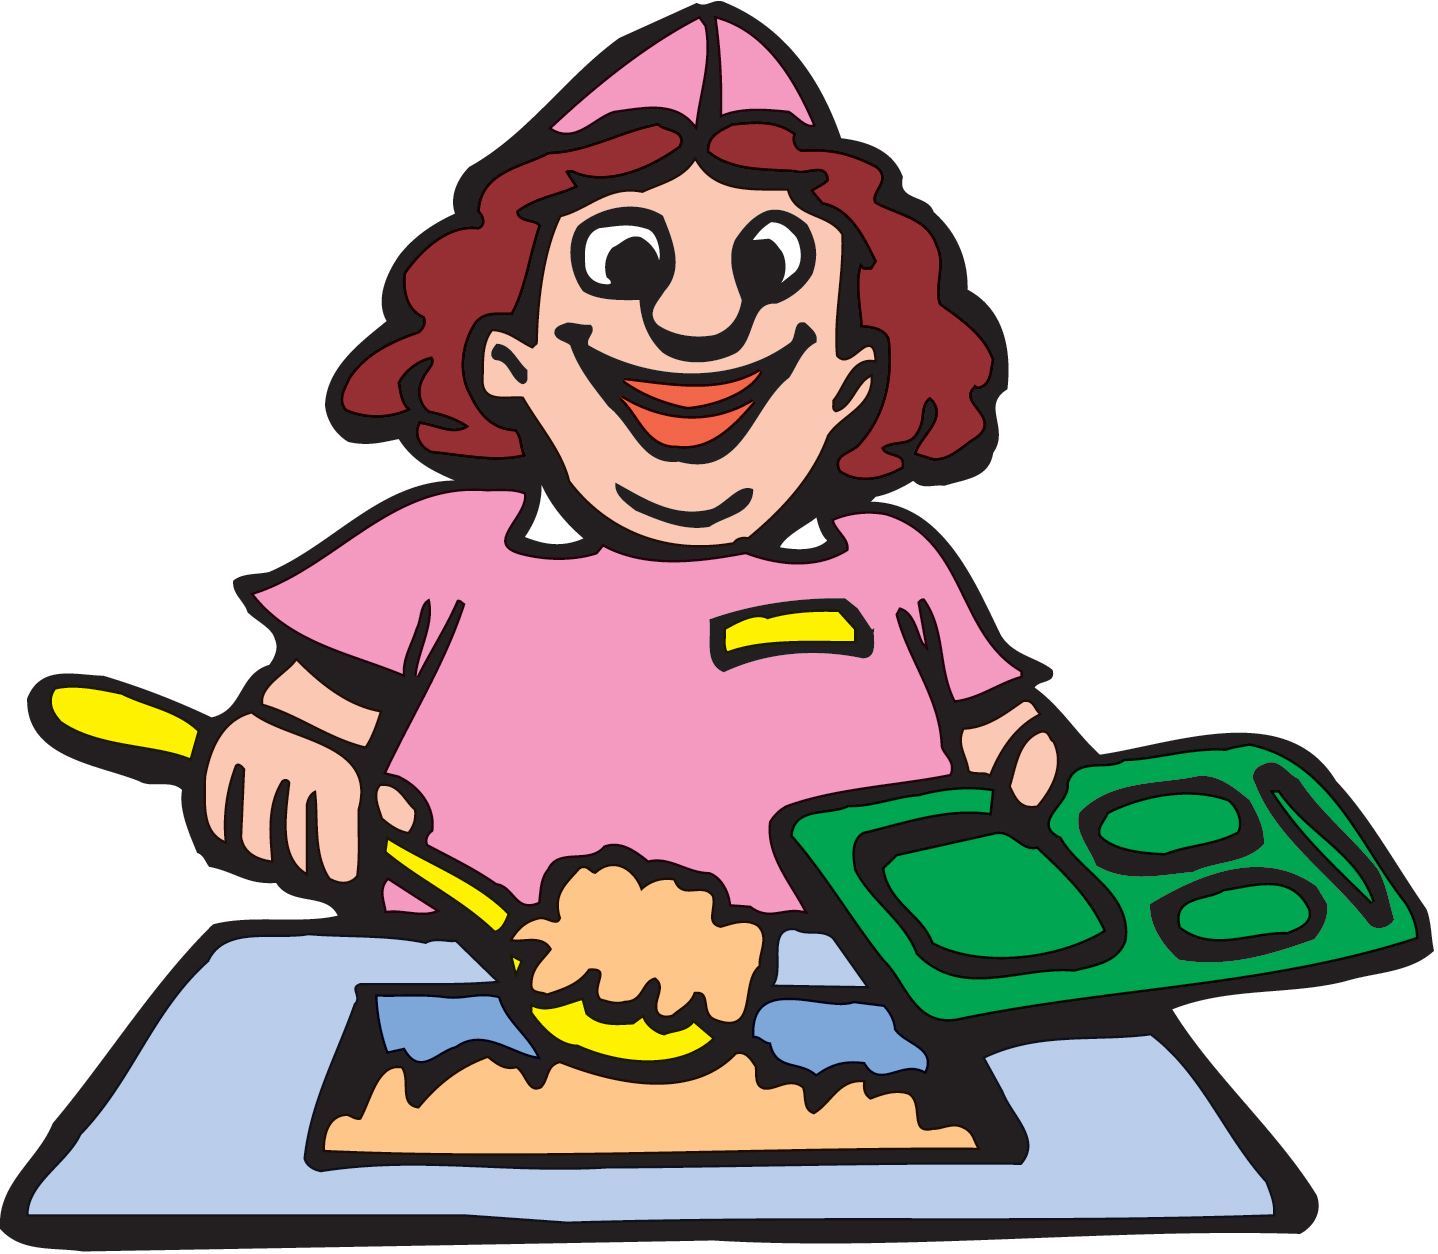 Lunch Lady Clipart | Clipart Panda - Free Clipart Images